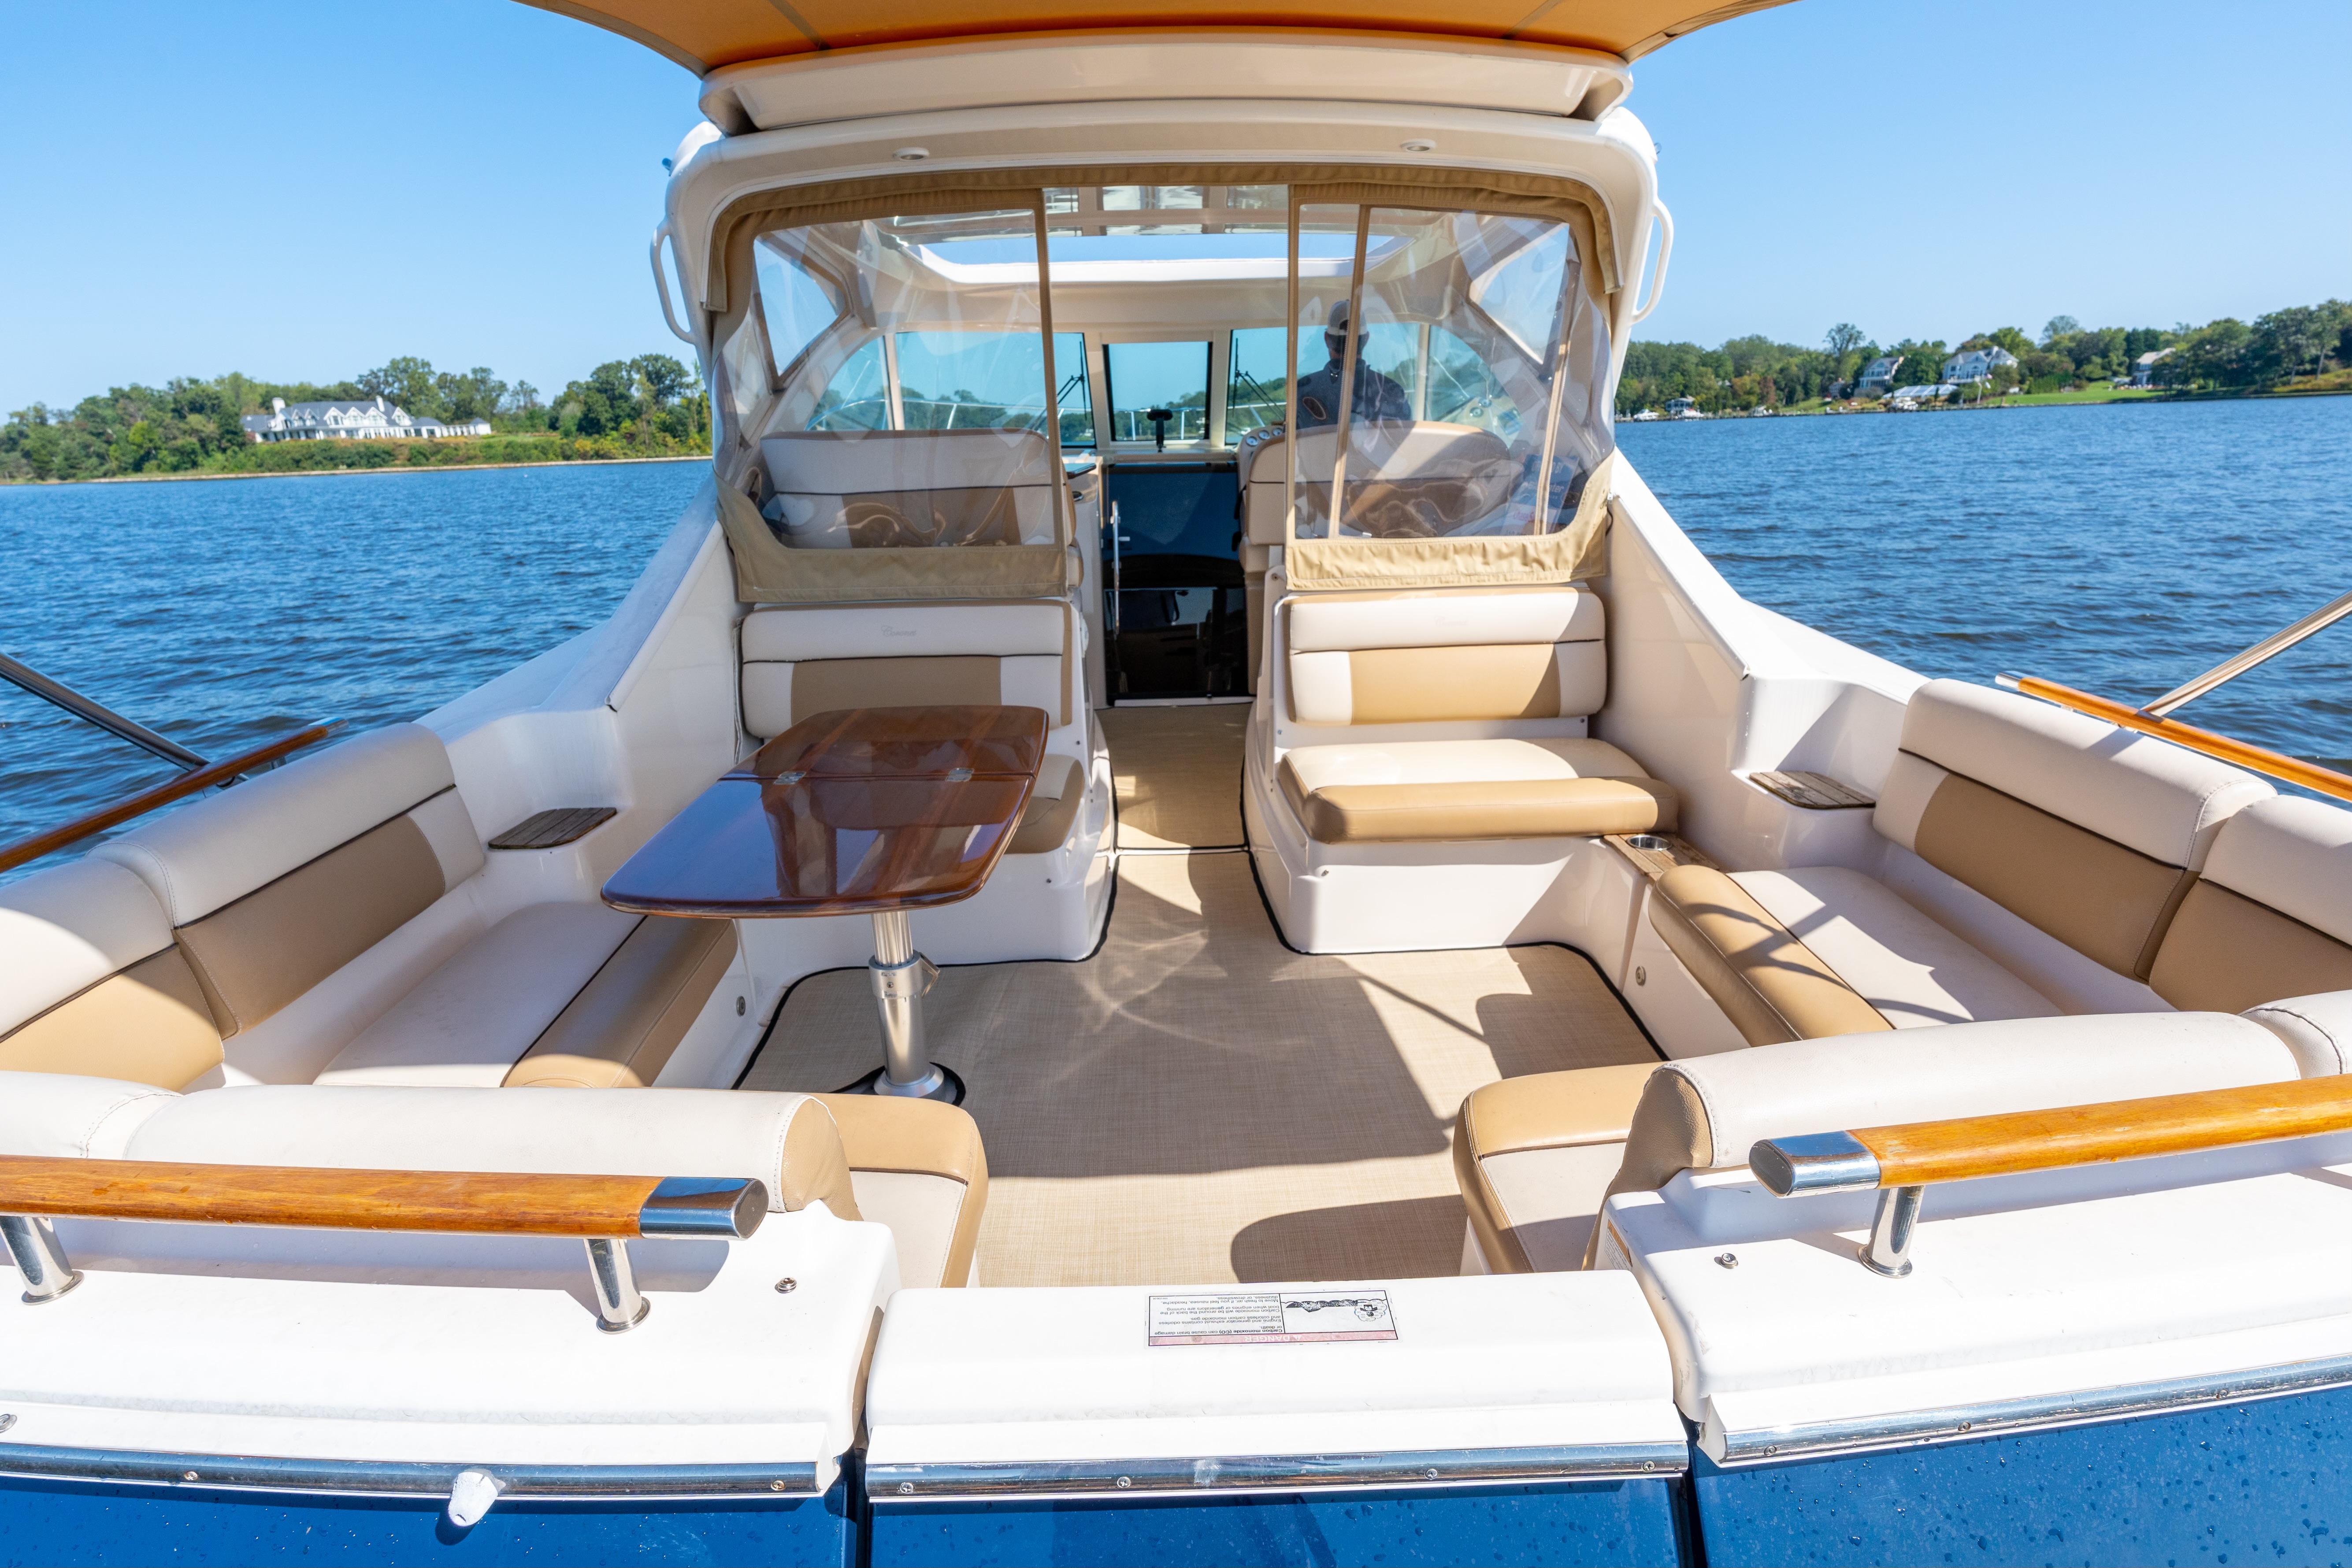 Blue Lotus Yacht for Sale  30 Tiara Yachts Edgewater, MD